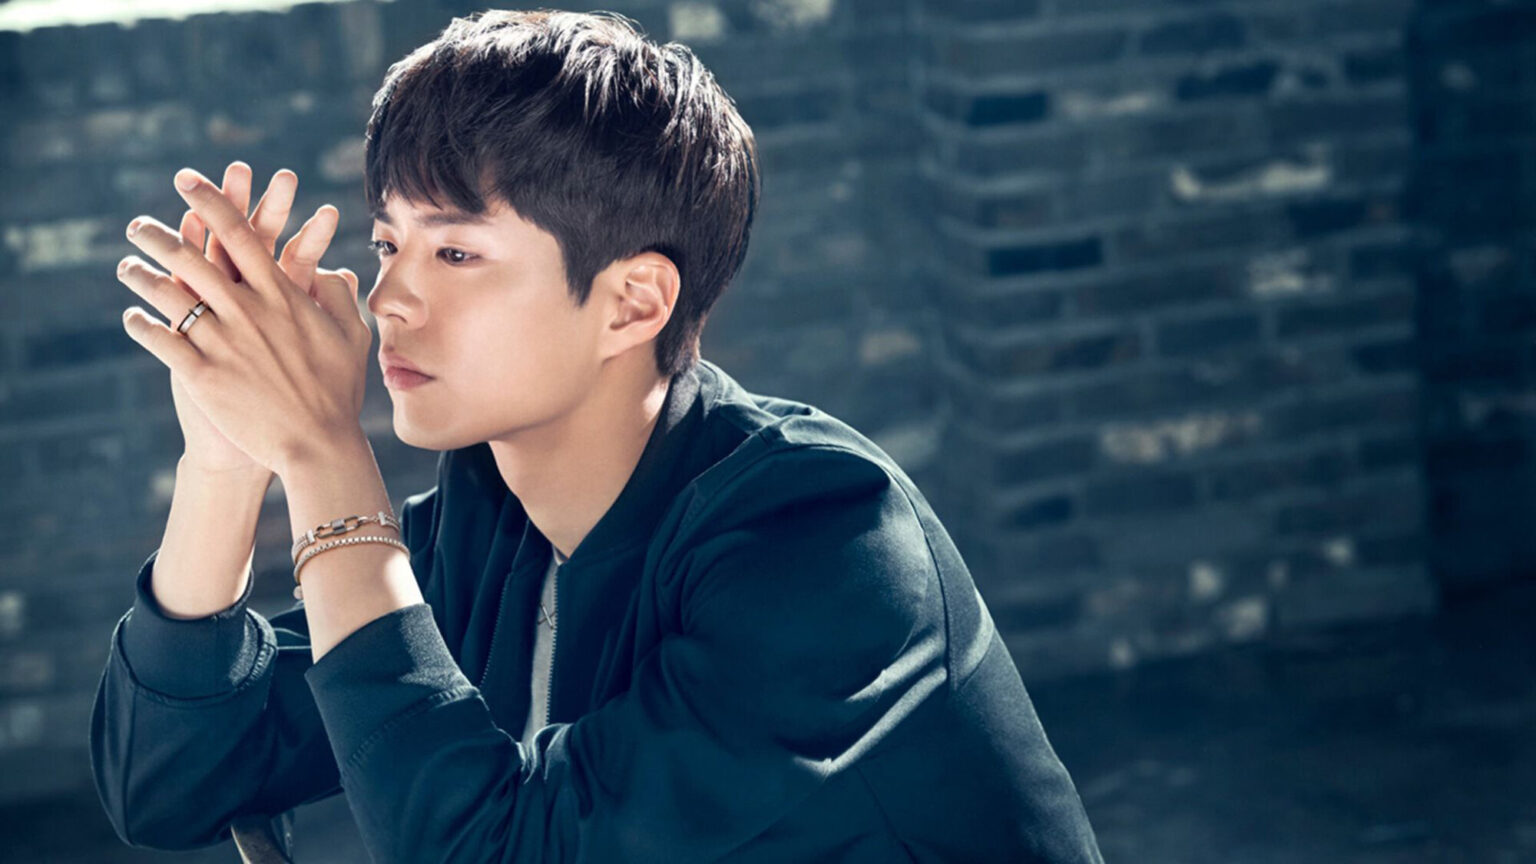 From K-pop star to actor, Park Bo-gum is our next Korean idol. Here’s everything to love about heartthrob Park Bo-gum.